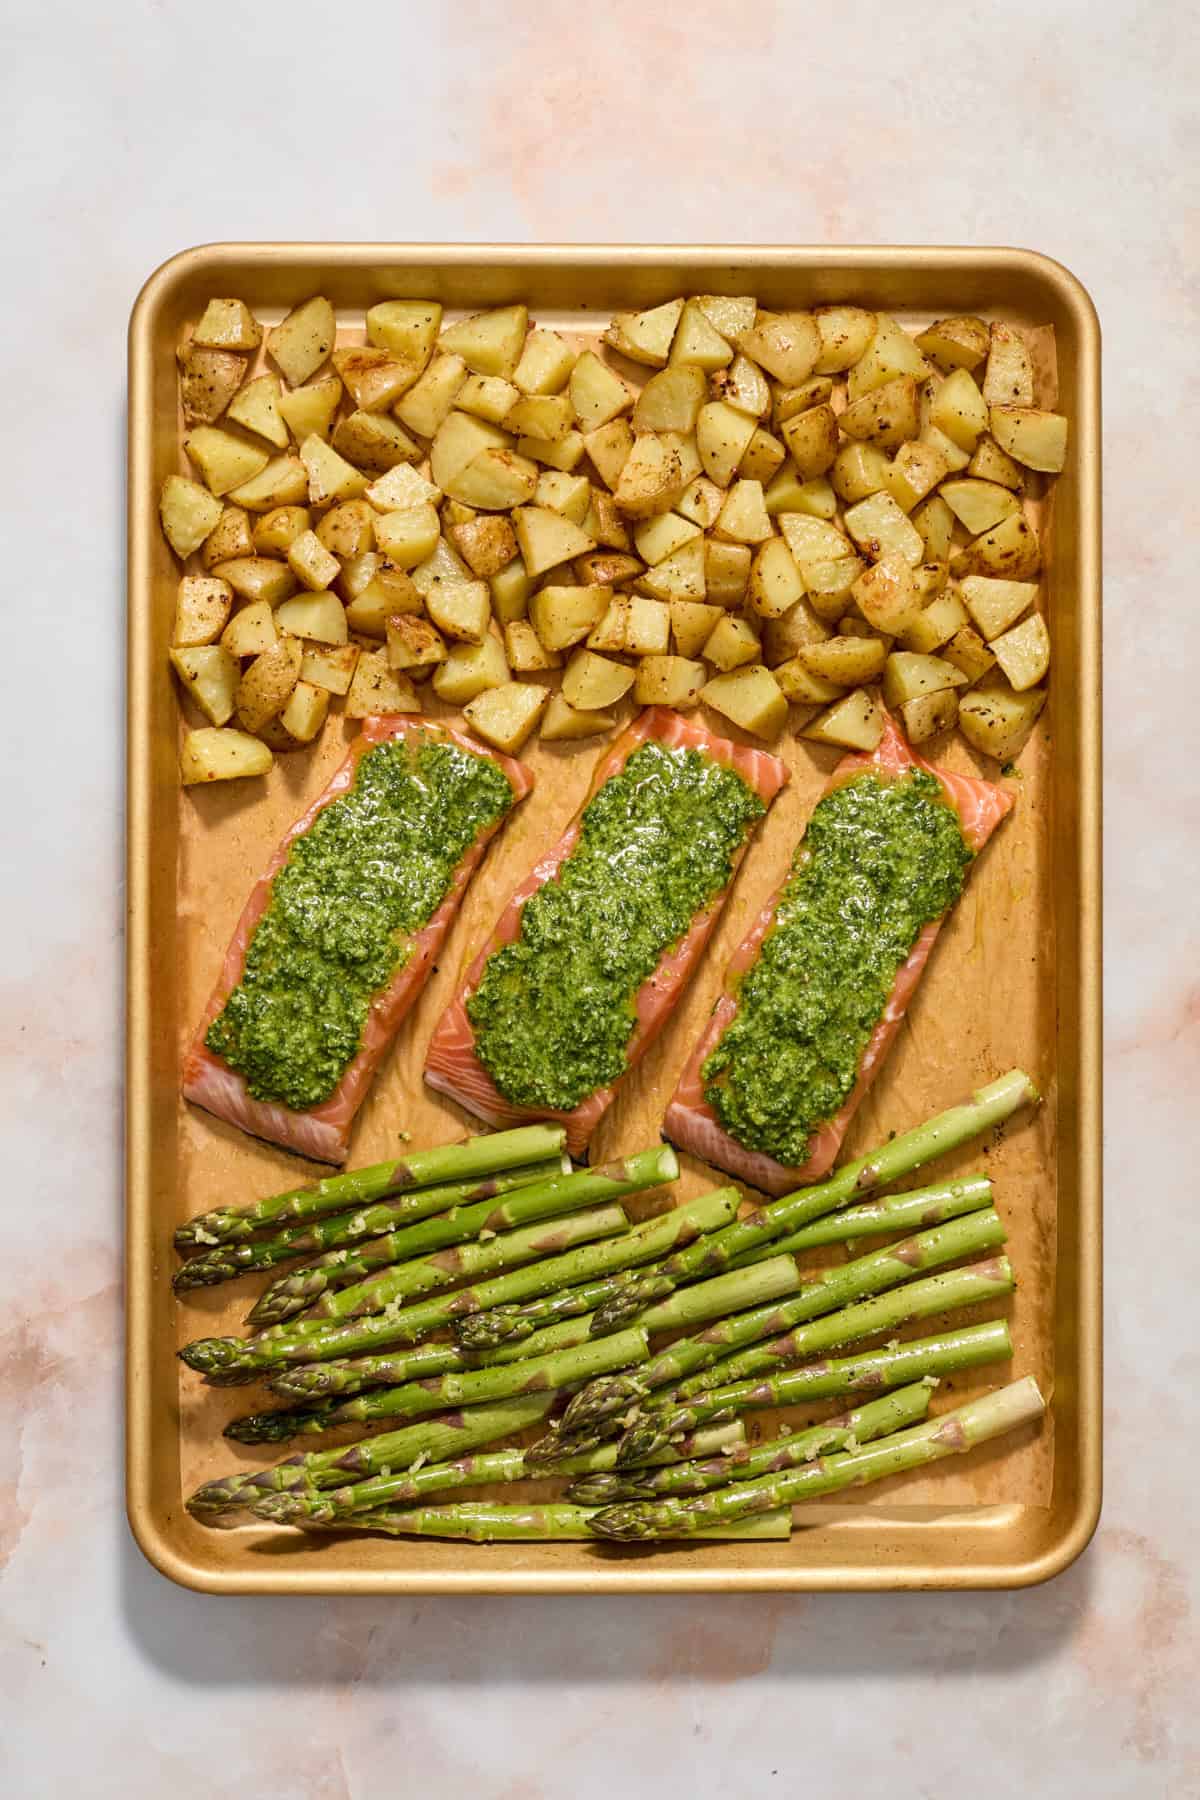 Asparagus added to pan with pesto salmon and roasted potatoes.